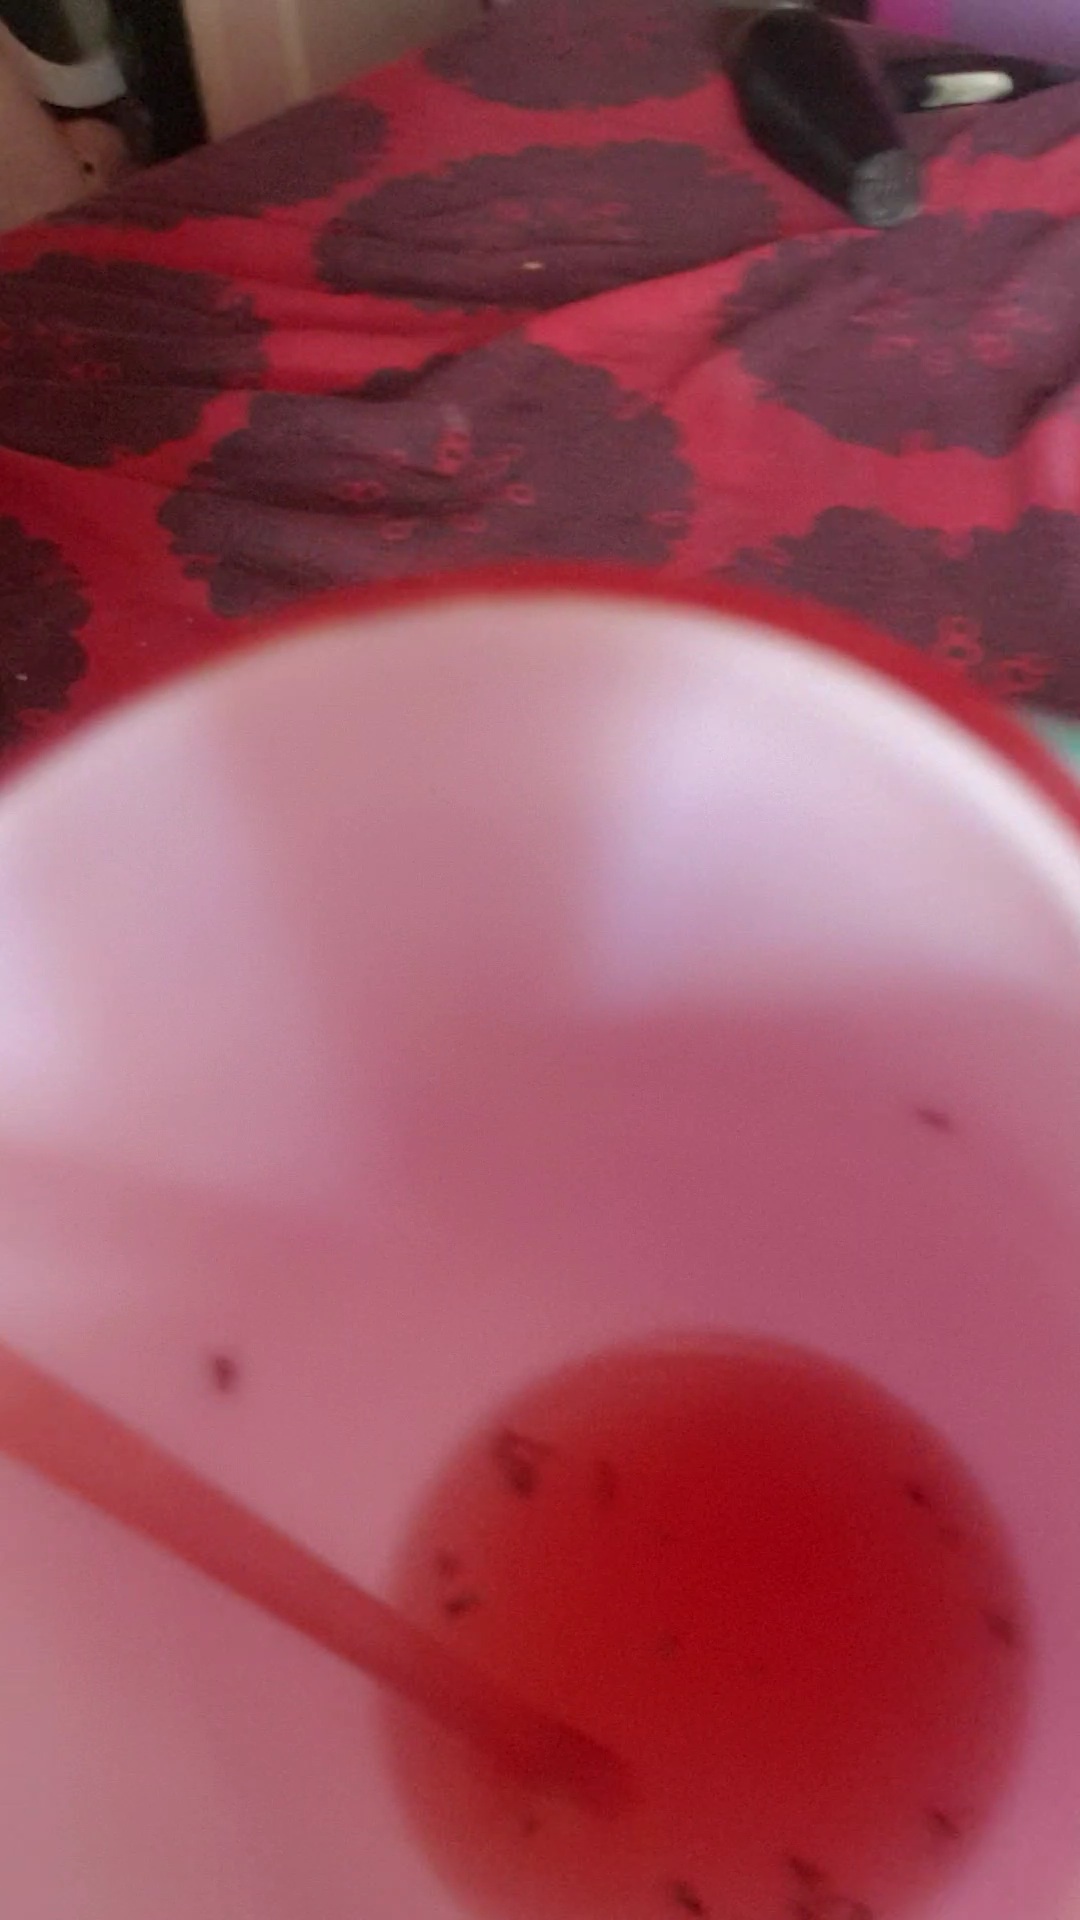 Drinking wine with fruit flies